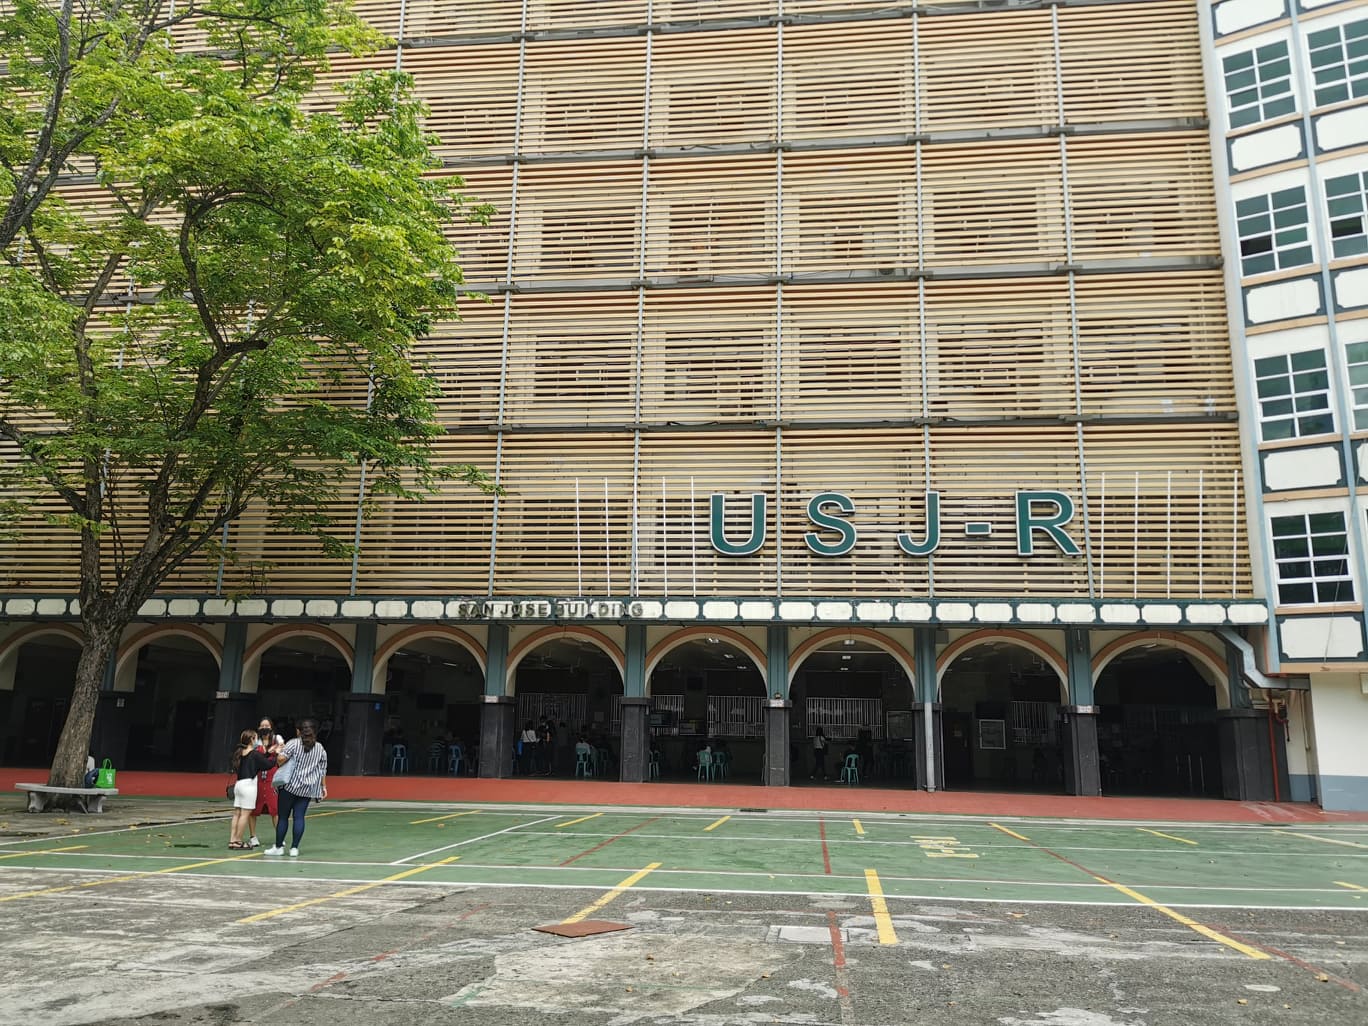 USJ-R hailed "Business School of the Year" by JA Philippines